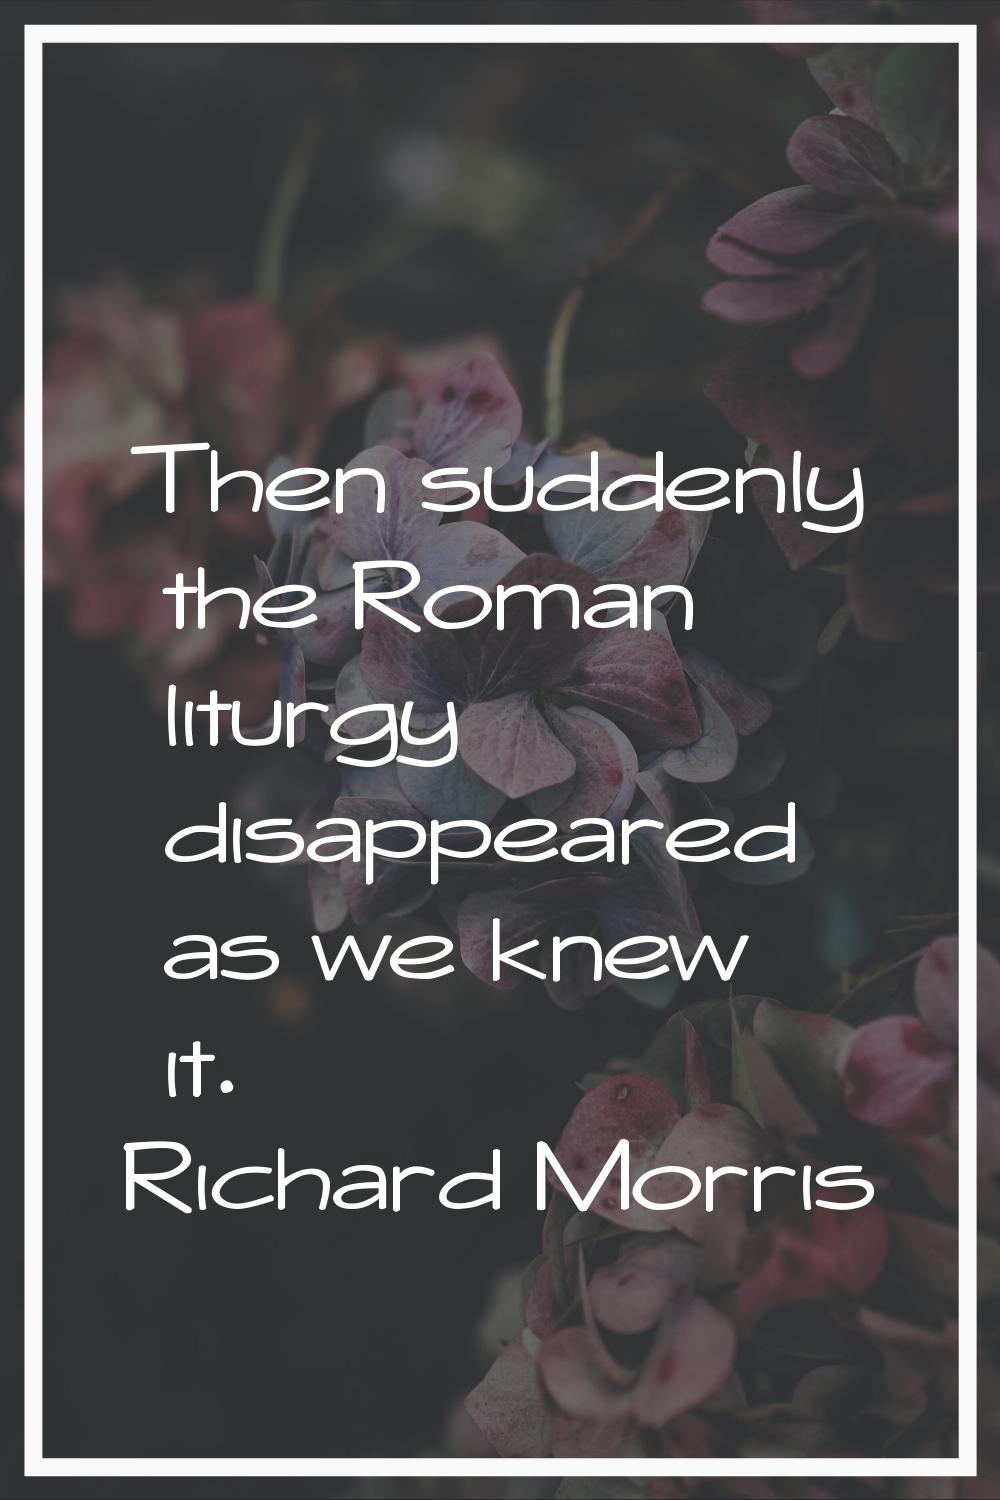 Then suddenly the Roman liturgy disappeared as we knew it.